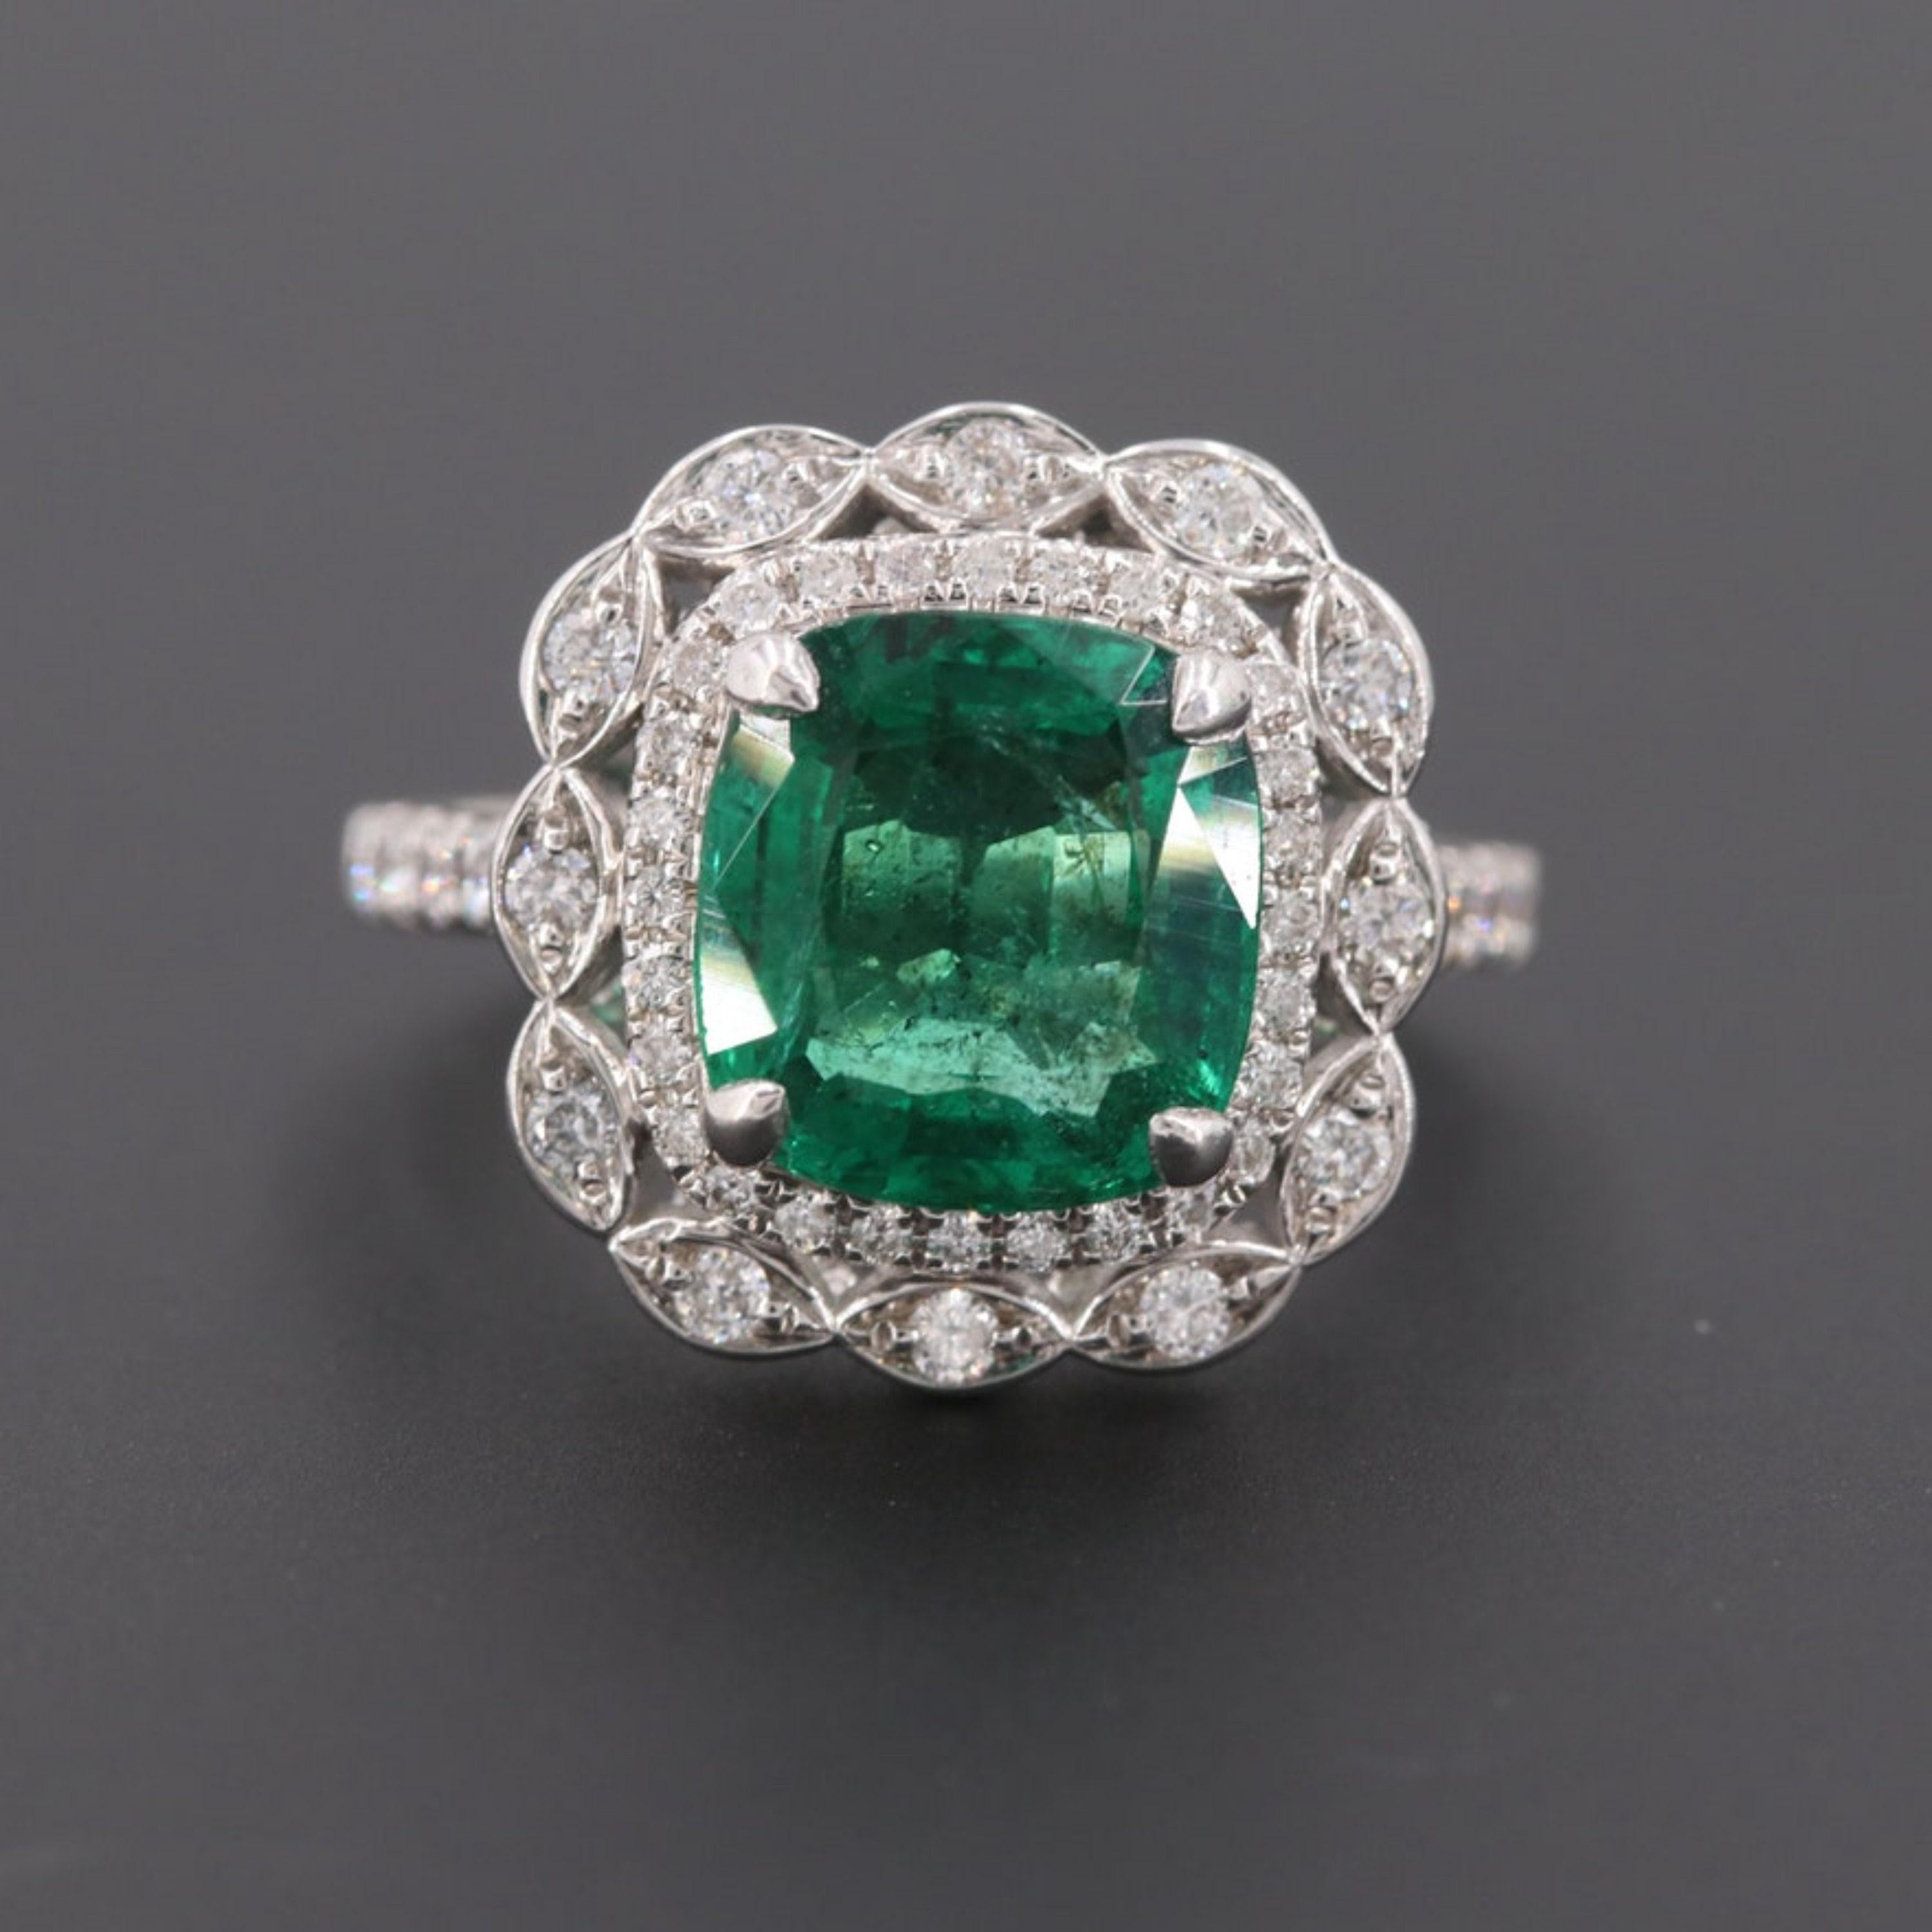 For Sale:  Art Deco 2 CT Natural Cushion Cut Emerald Engagement Ring, Diamond Cocktail Ring 6